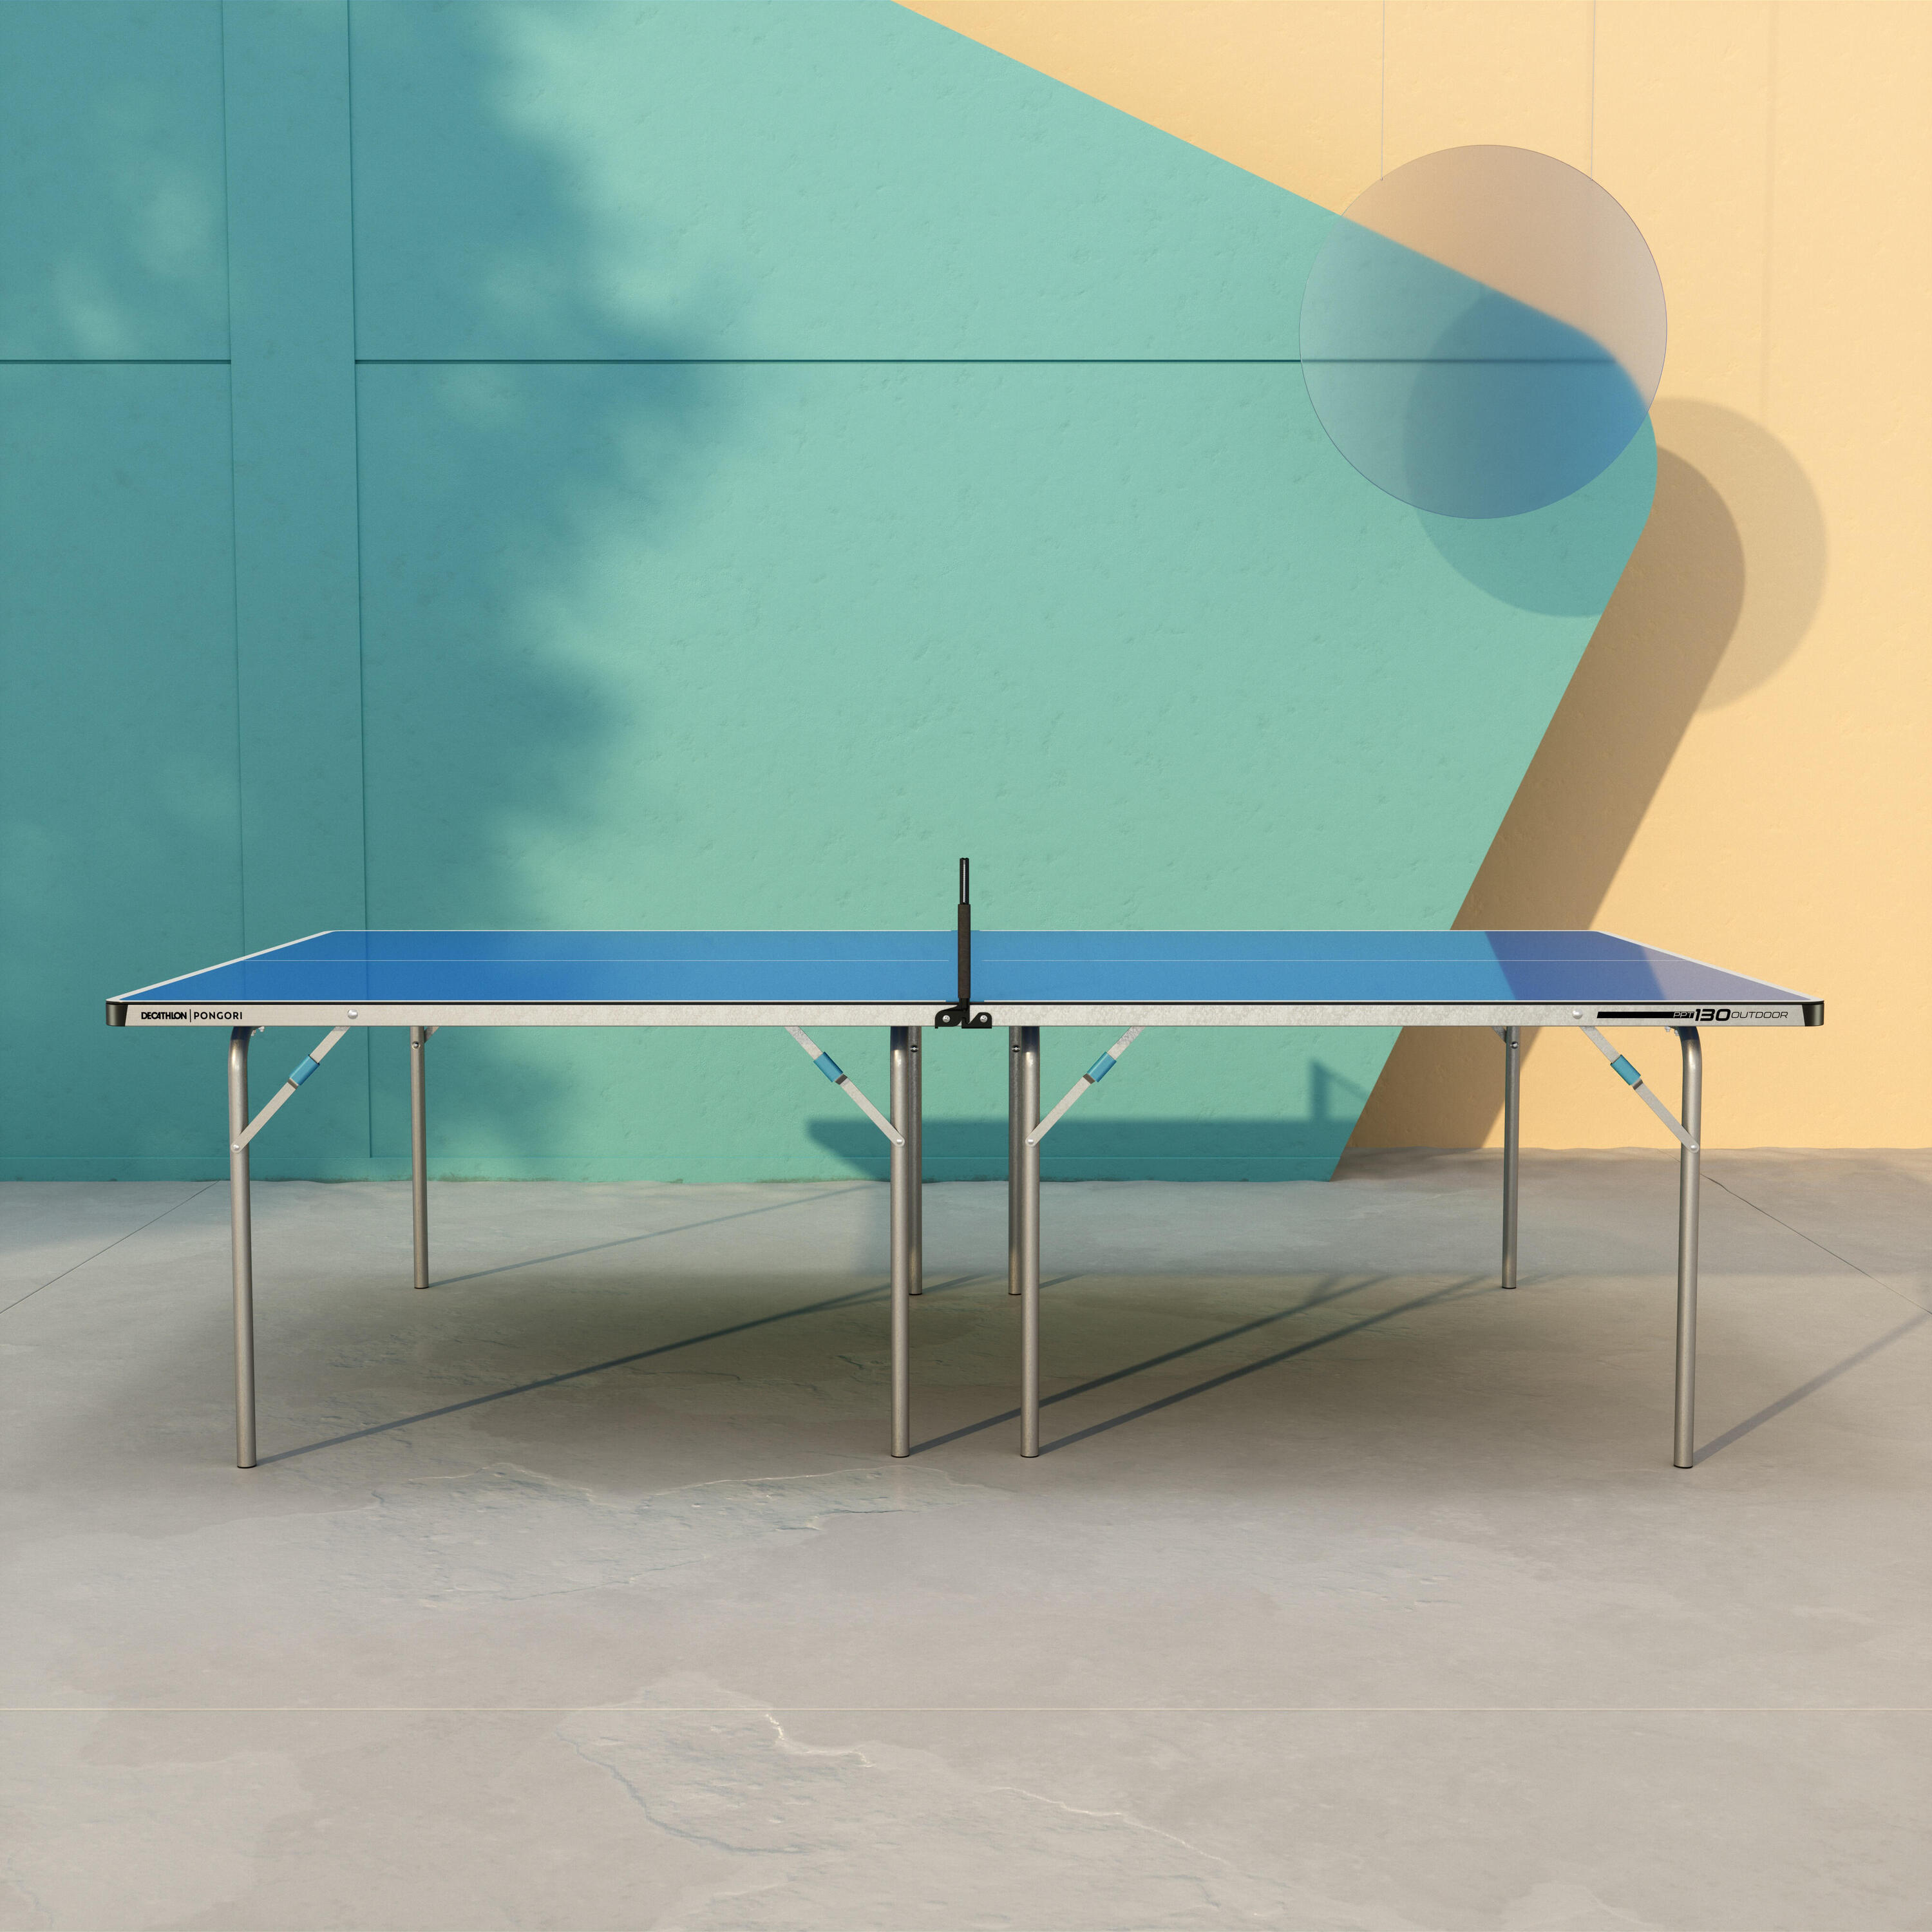 Outdoor Table Tennis Table PPT 130 - Blue 6/10